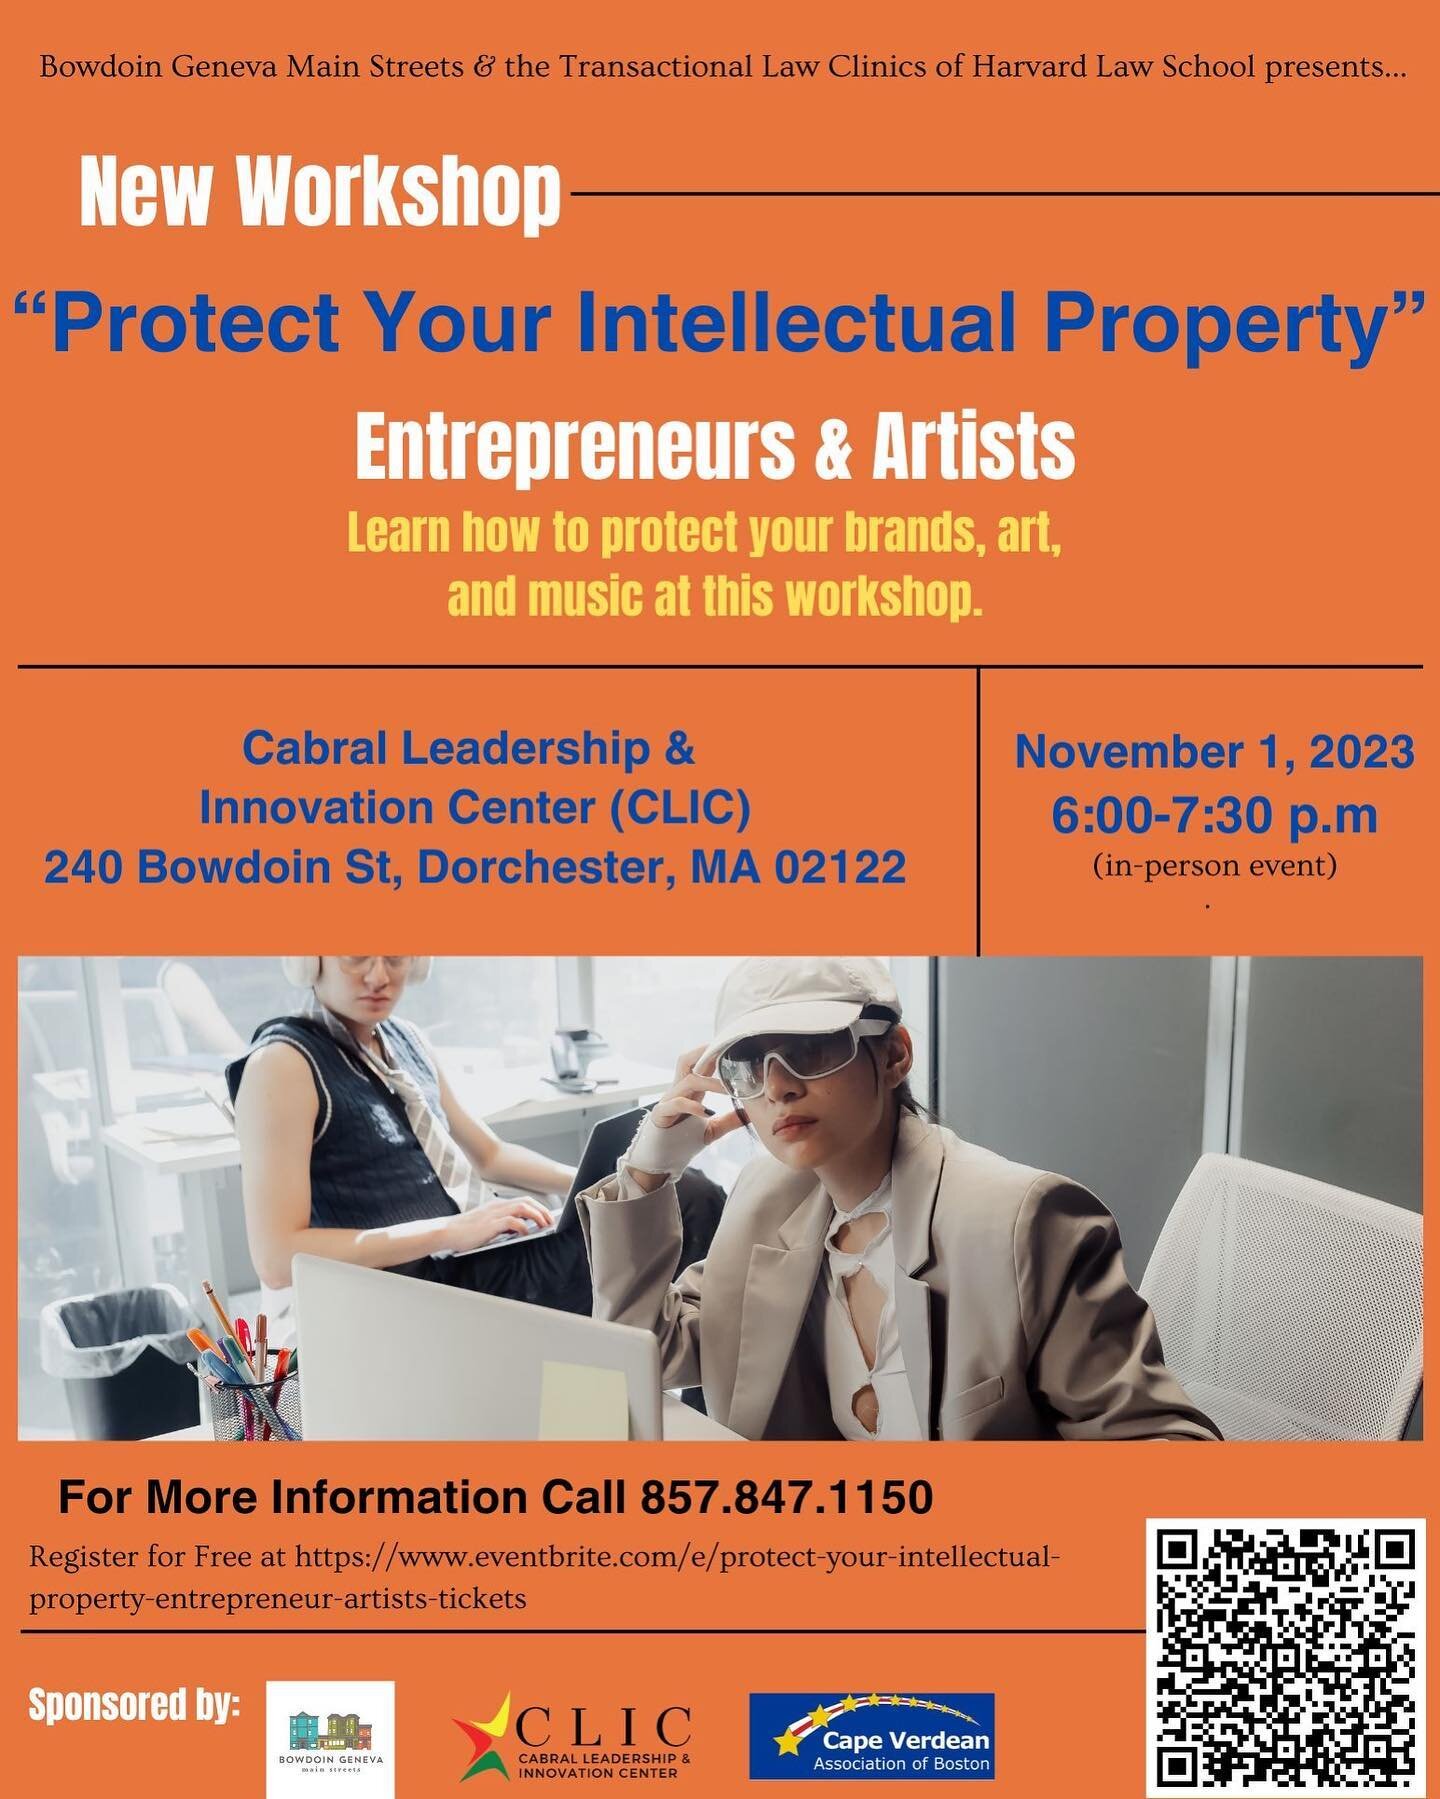 ***Free Workshop*** - Protect Your Intellectual Property as an artist or an entrepreneur. Get advice and learn ways to protect your brand, art and music. Join us November 1, 2023.

Eventbrite link: https://www.eventbrite.com/e/protect-your-intellectu